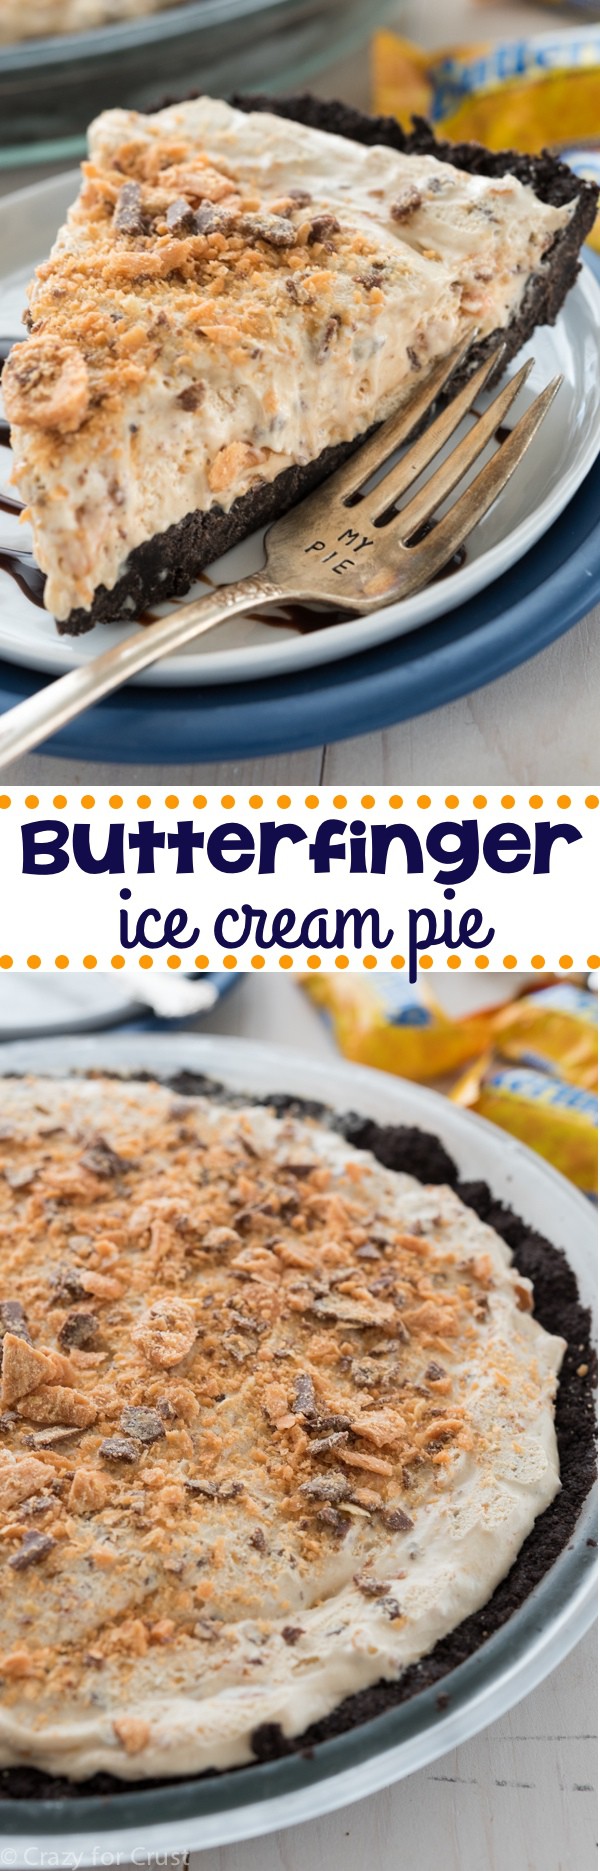 No Bake Butterfinger Ice Cream Pie - an easy no bake pie with an Oreo Crust! Full of peanut butter and Butterfinger ice cream!